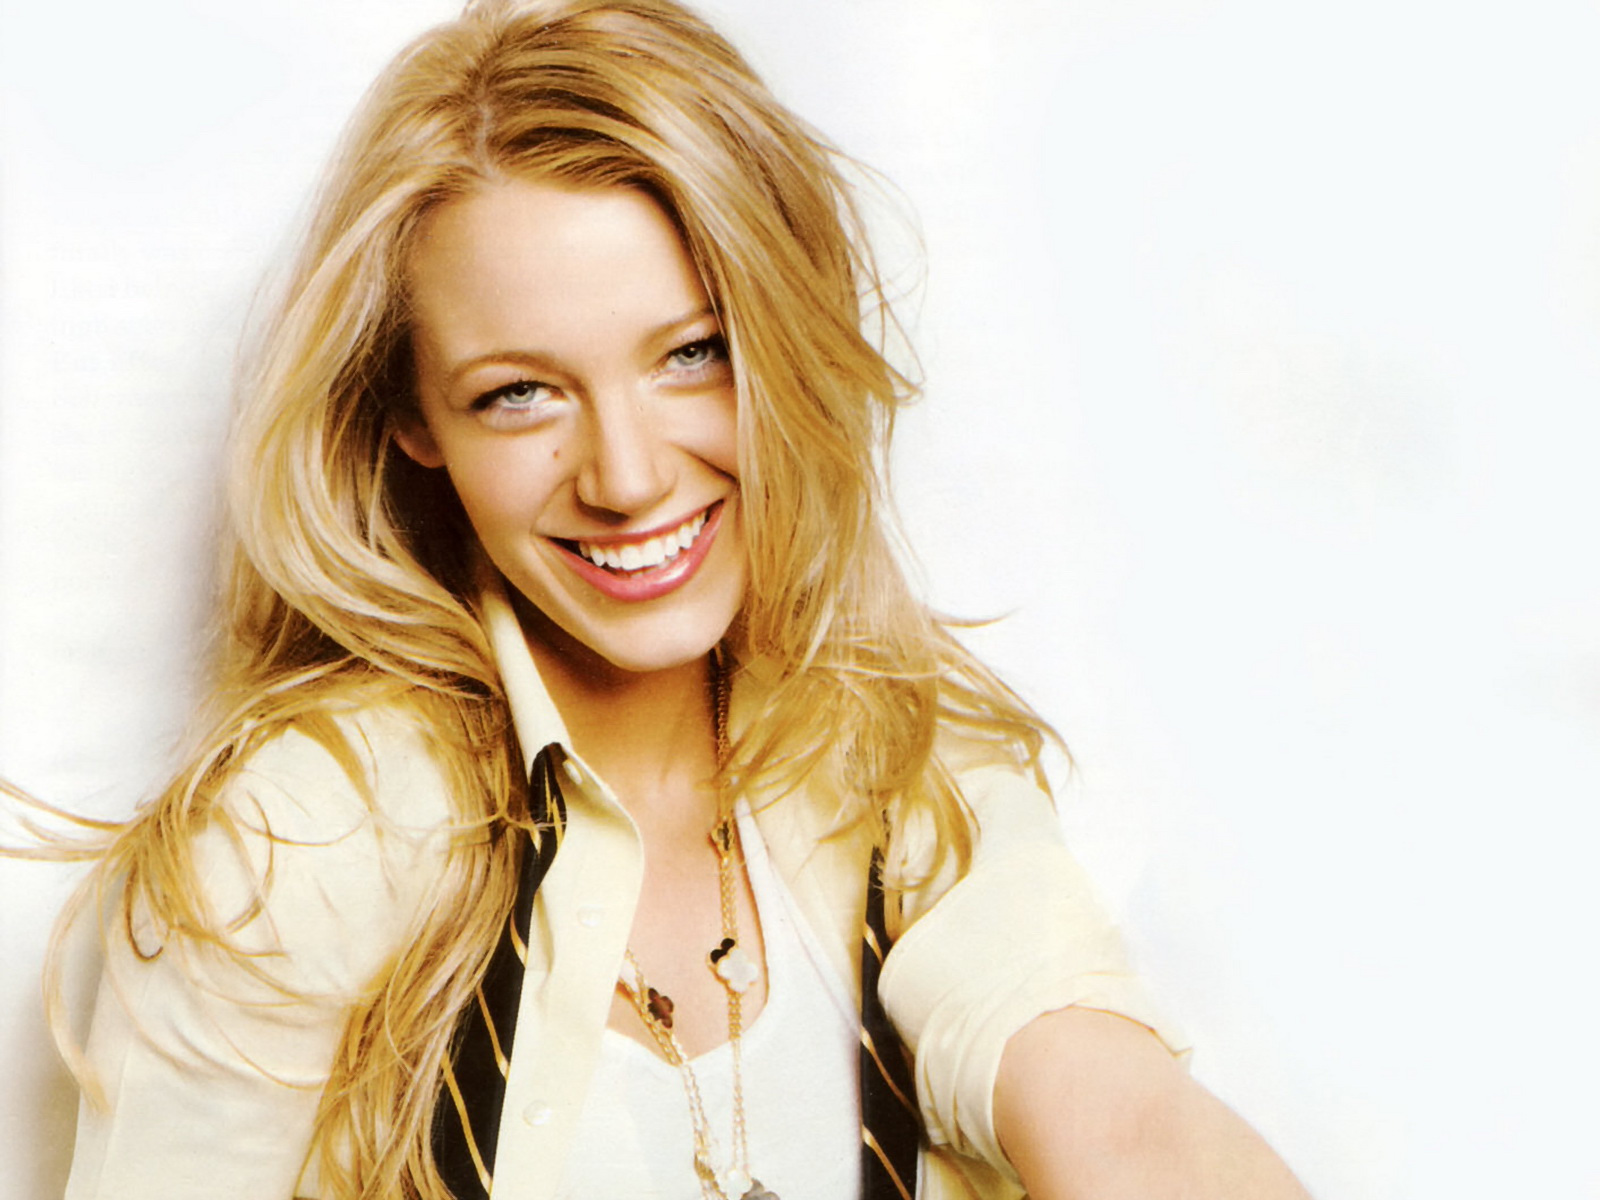 Blake Lively Wallpapers